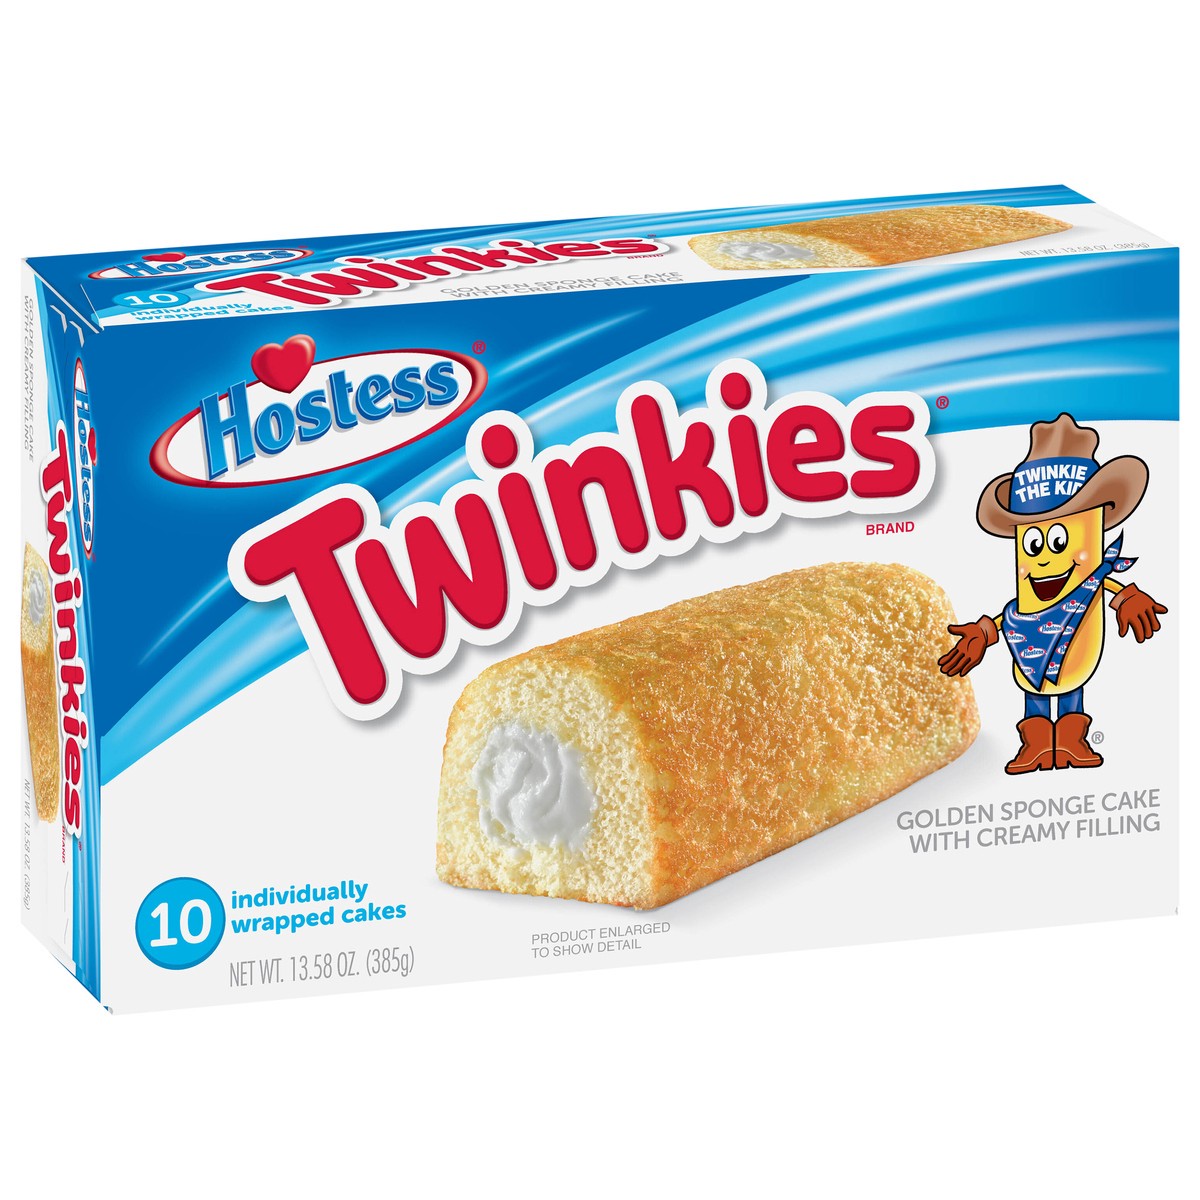 slide 3 of 9, HOSTESS TWINKIES, Creamy Golden Sponge Cake, Individually Wrapped, 10 Count 13.58 oz, 10 ct